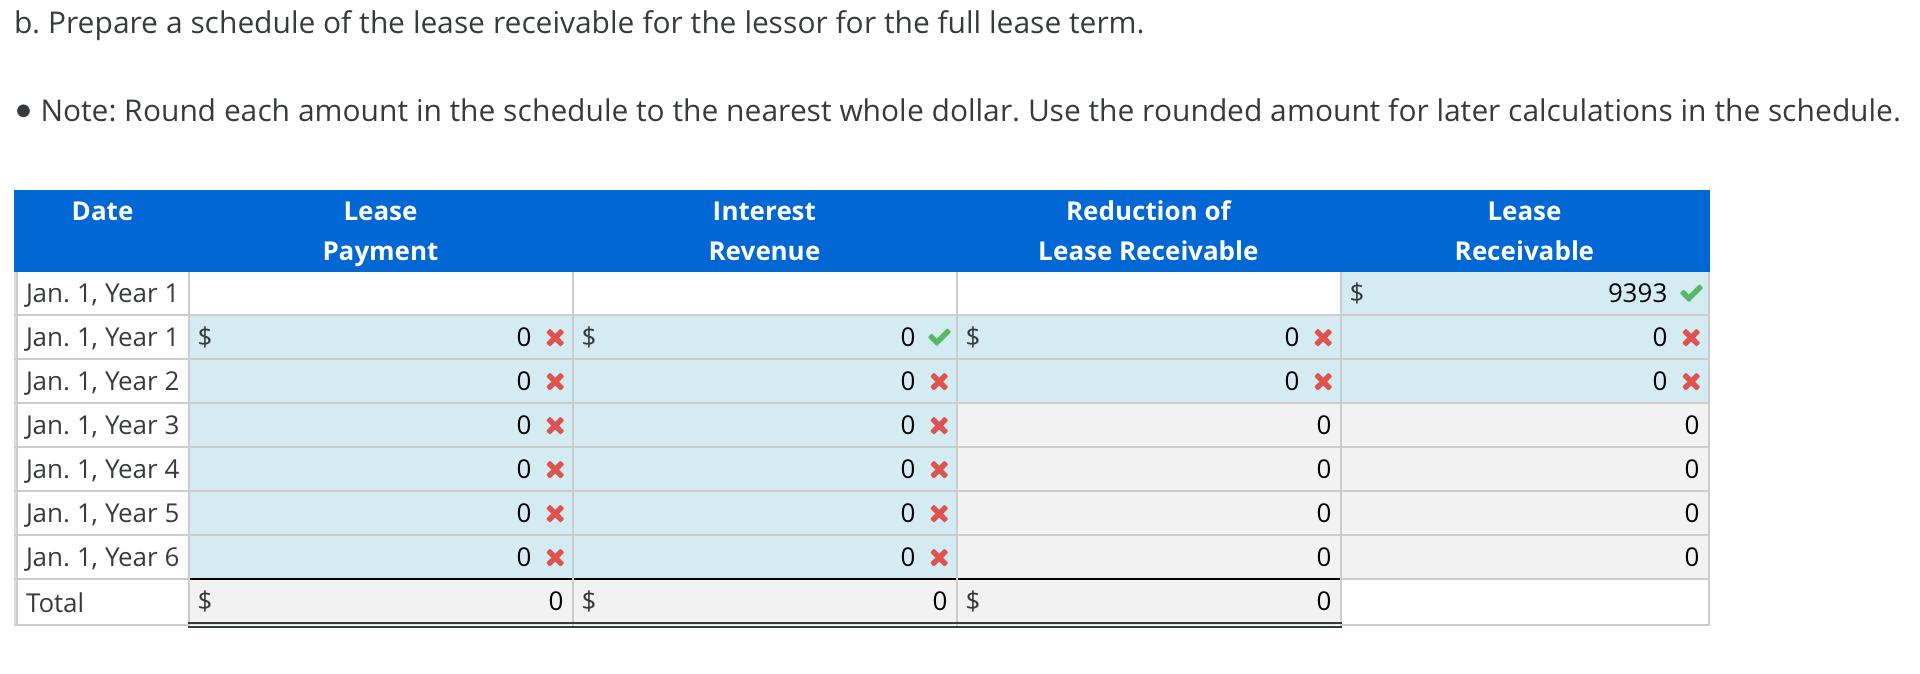 b. Prepare a schedule of the lease receivable for the lessor for the full lease term. - Note: Round each amount in the schedu